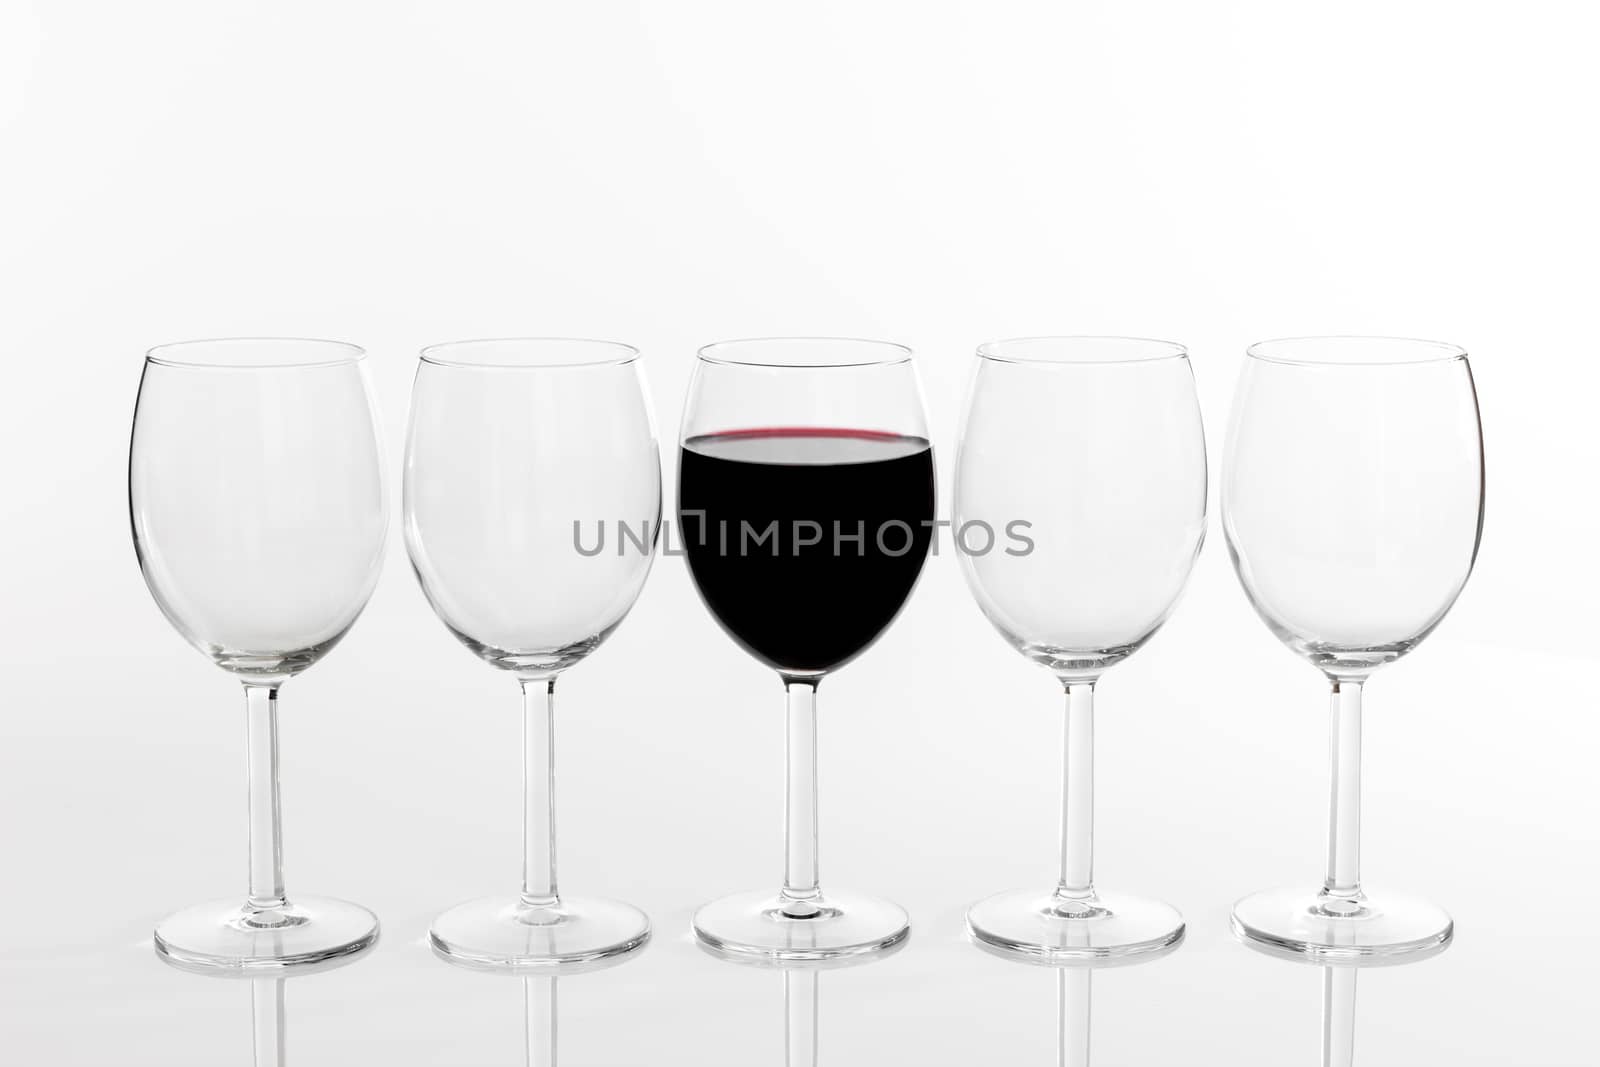 Glass of red wine in a row of empty glasses, on white background.